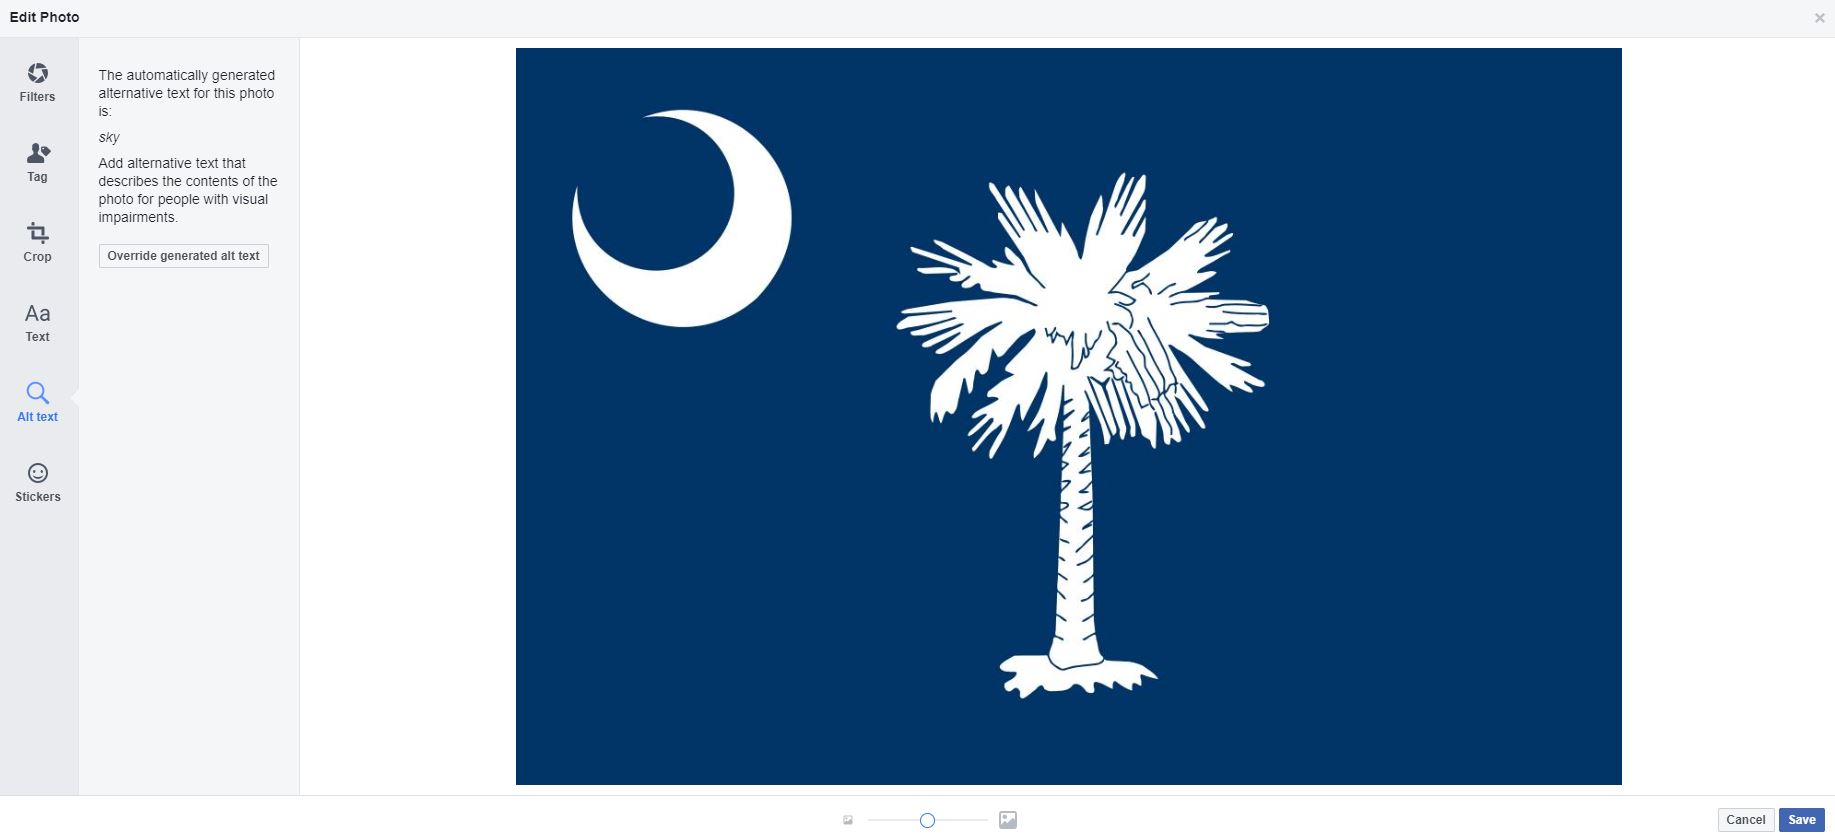 Screenshot of a South Carolina flag with options to edit the photo. Editing options include: filters, tag, crop, text, alt text, and stickers.